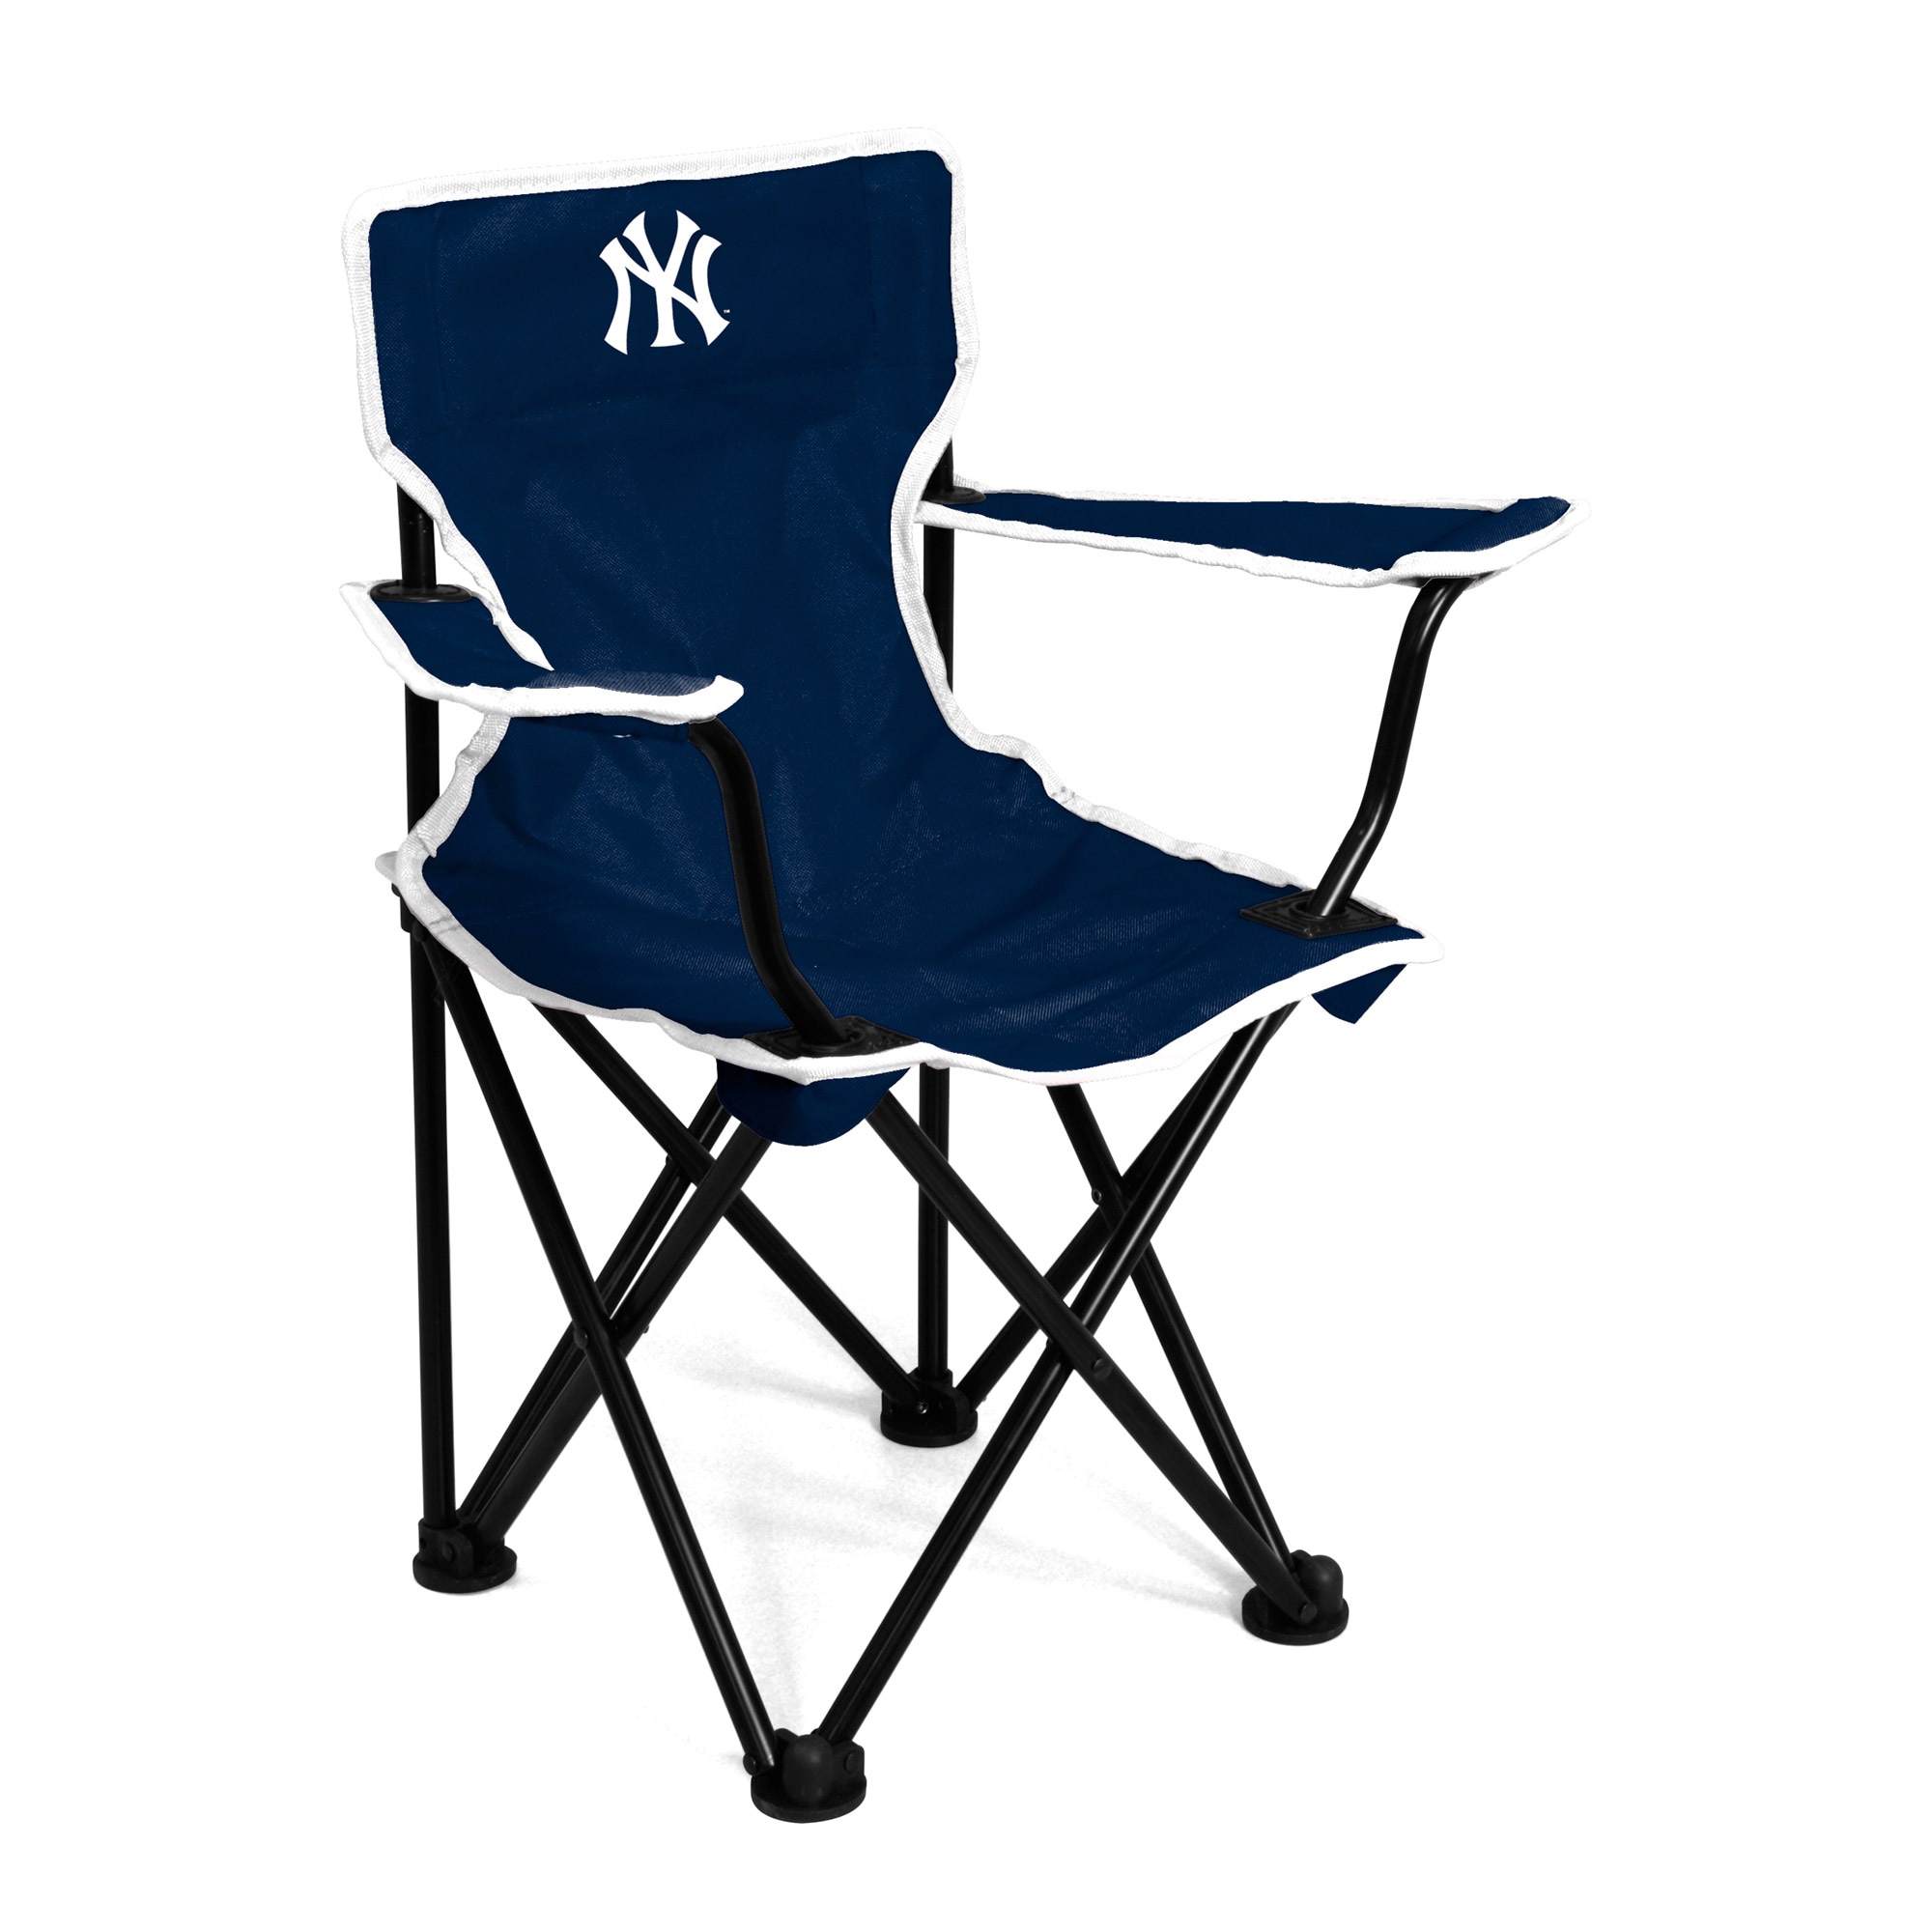 NY Yankees Toddler Chair - image 1 of 2